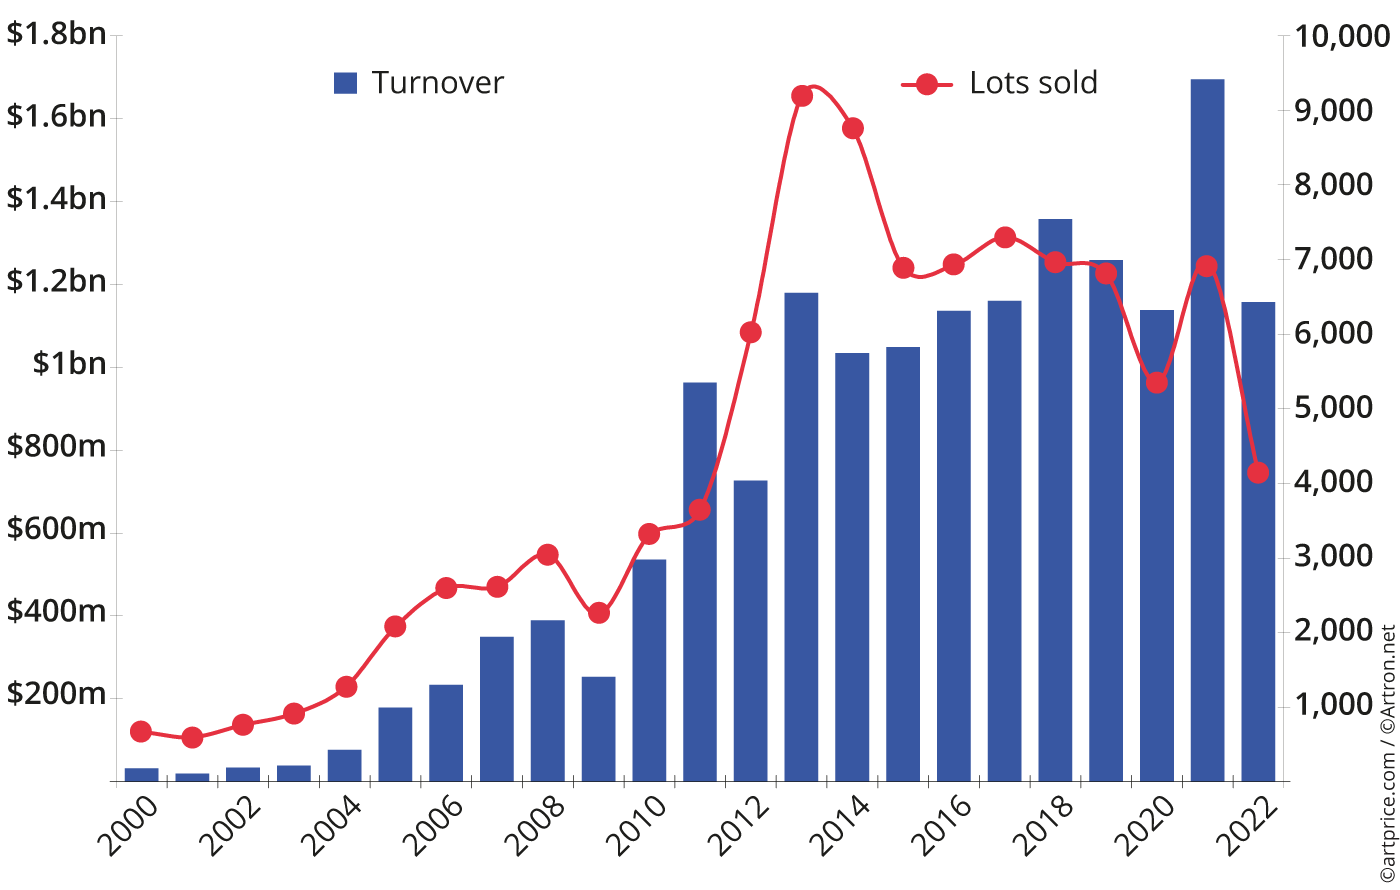 Annual evolution of fine art and NFT auction turnover and transactions in Hong Kong (2008-2022)